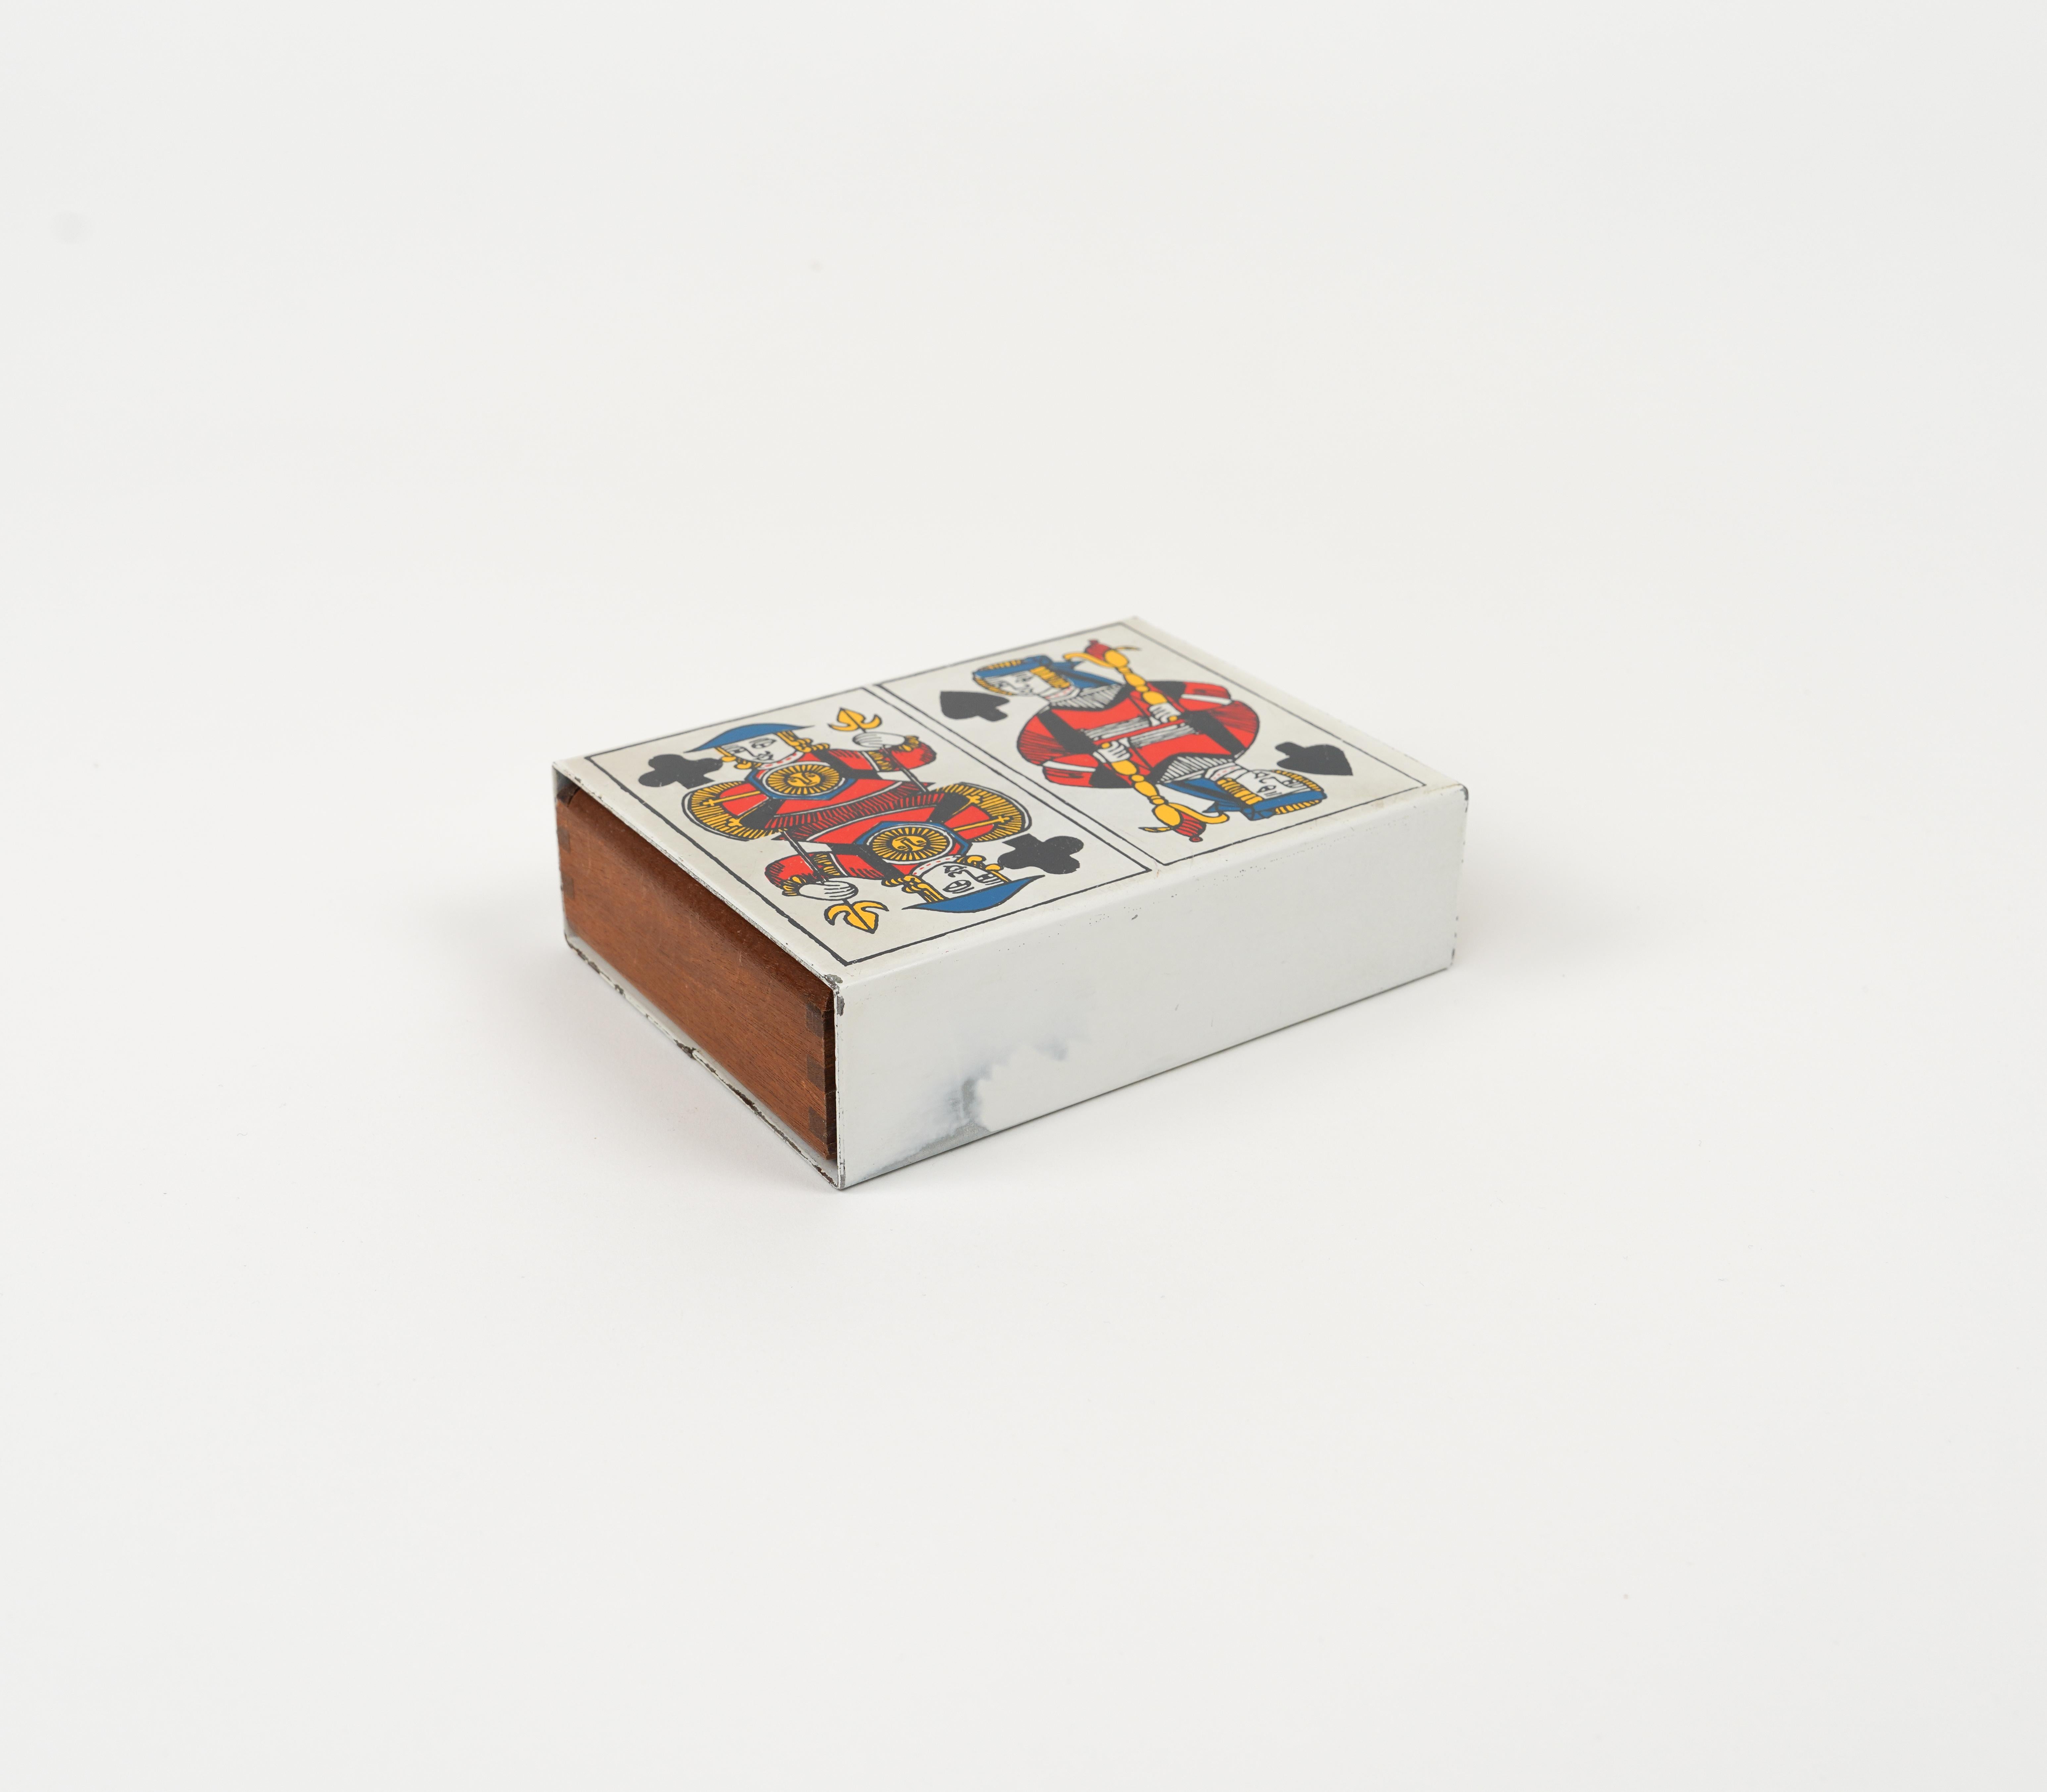 Italian Midcentury Box in Enameled Metal and Wood by Piero Fornasetti, Italy 1960s